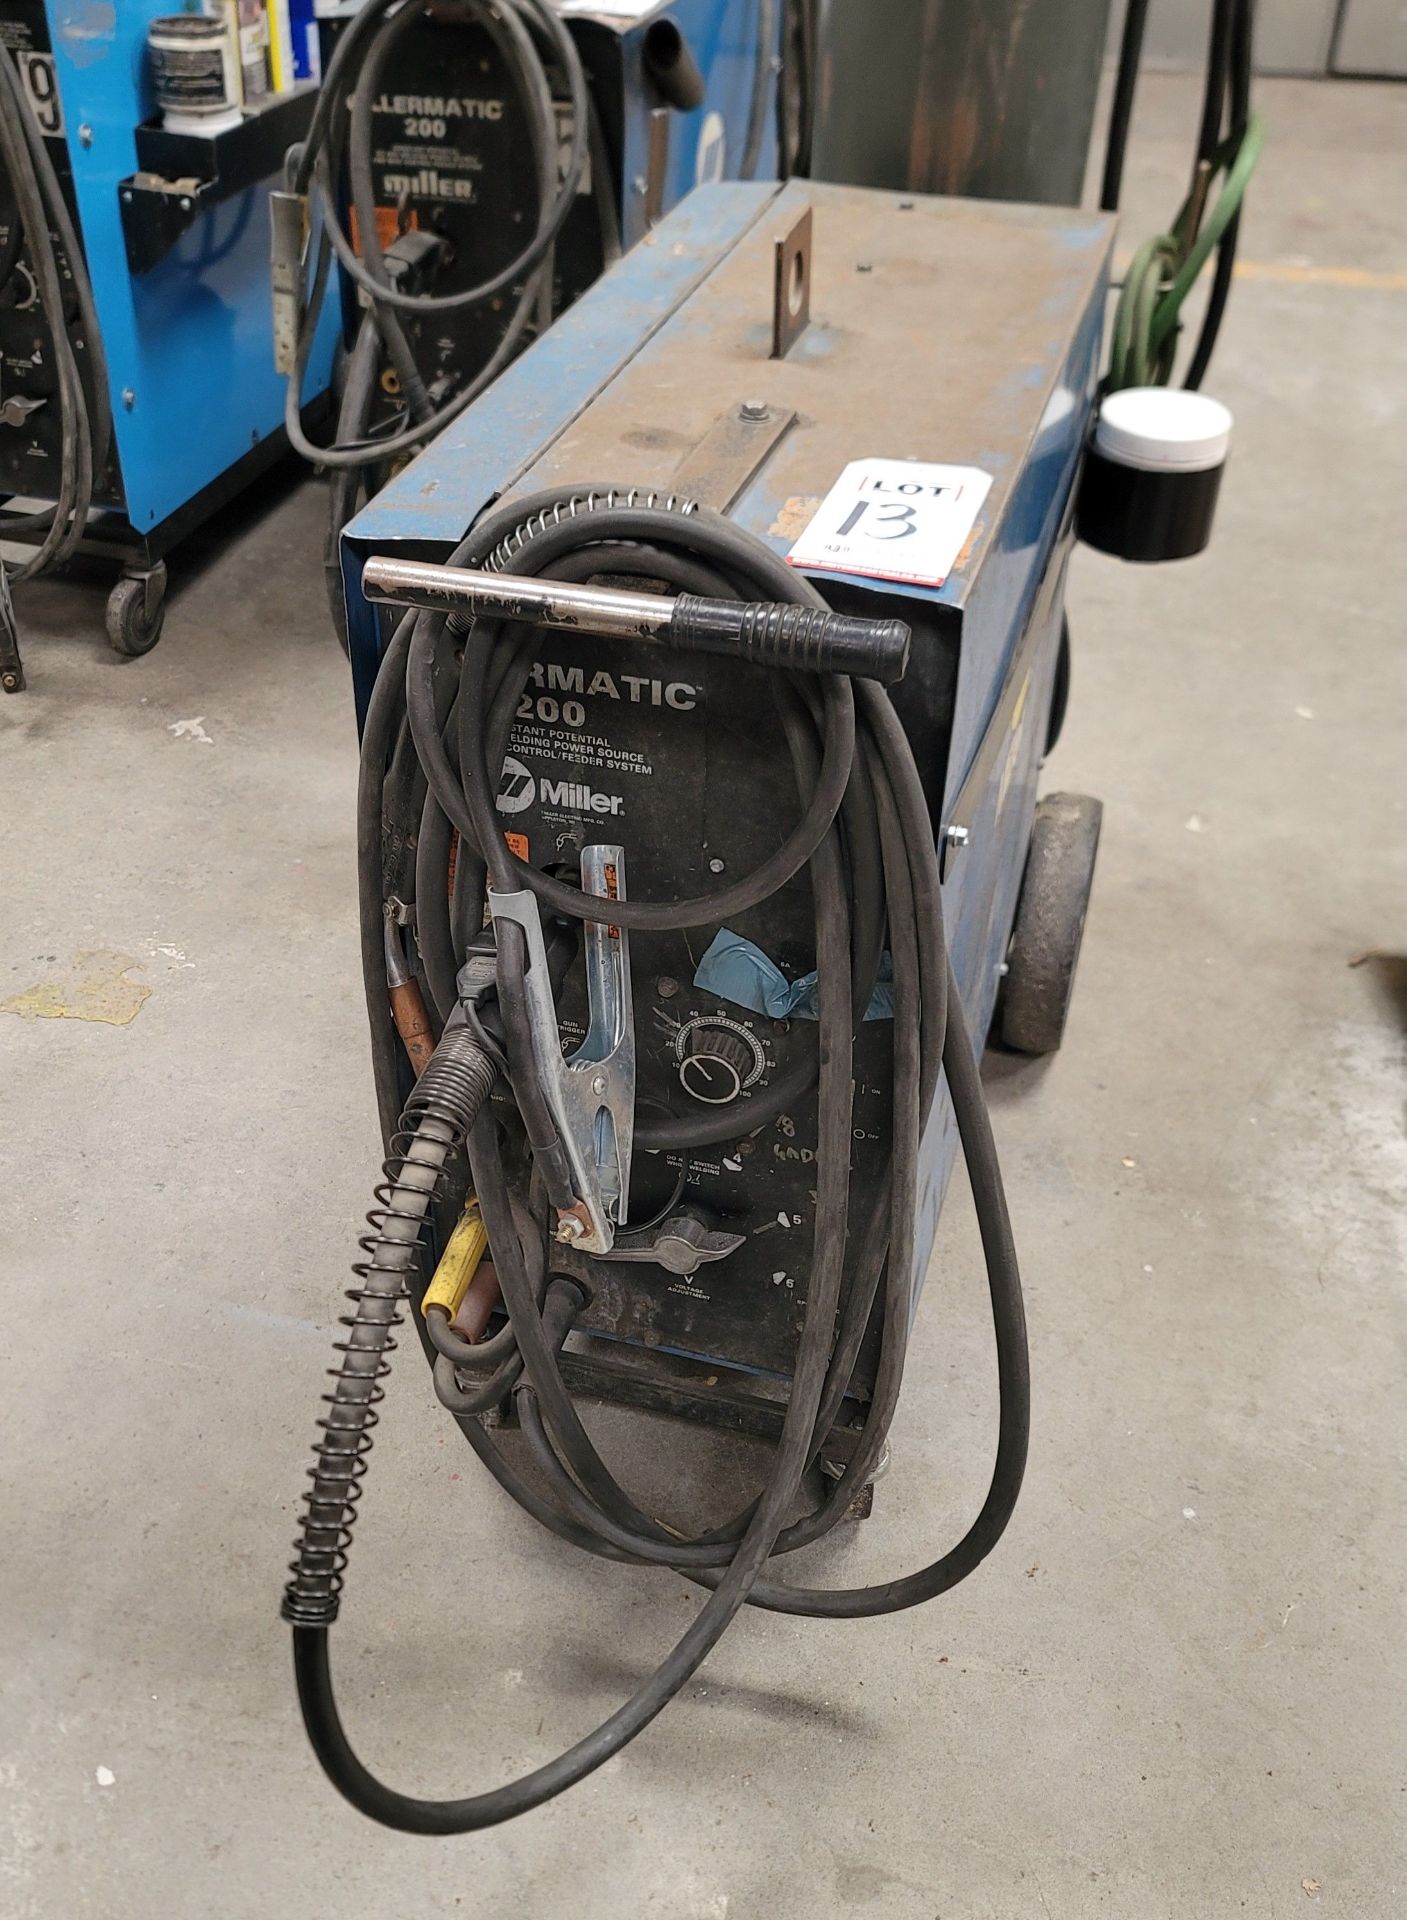 MILLERMATIC 200 WELDING POWER SOURCE, STOCK NO. 048291, S/N JH298273, GAS CYLINDER NOT INCLUDED